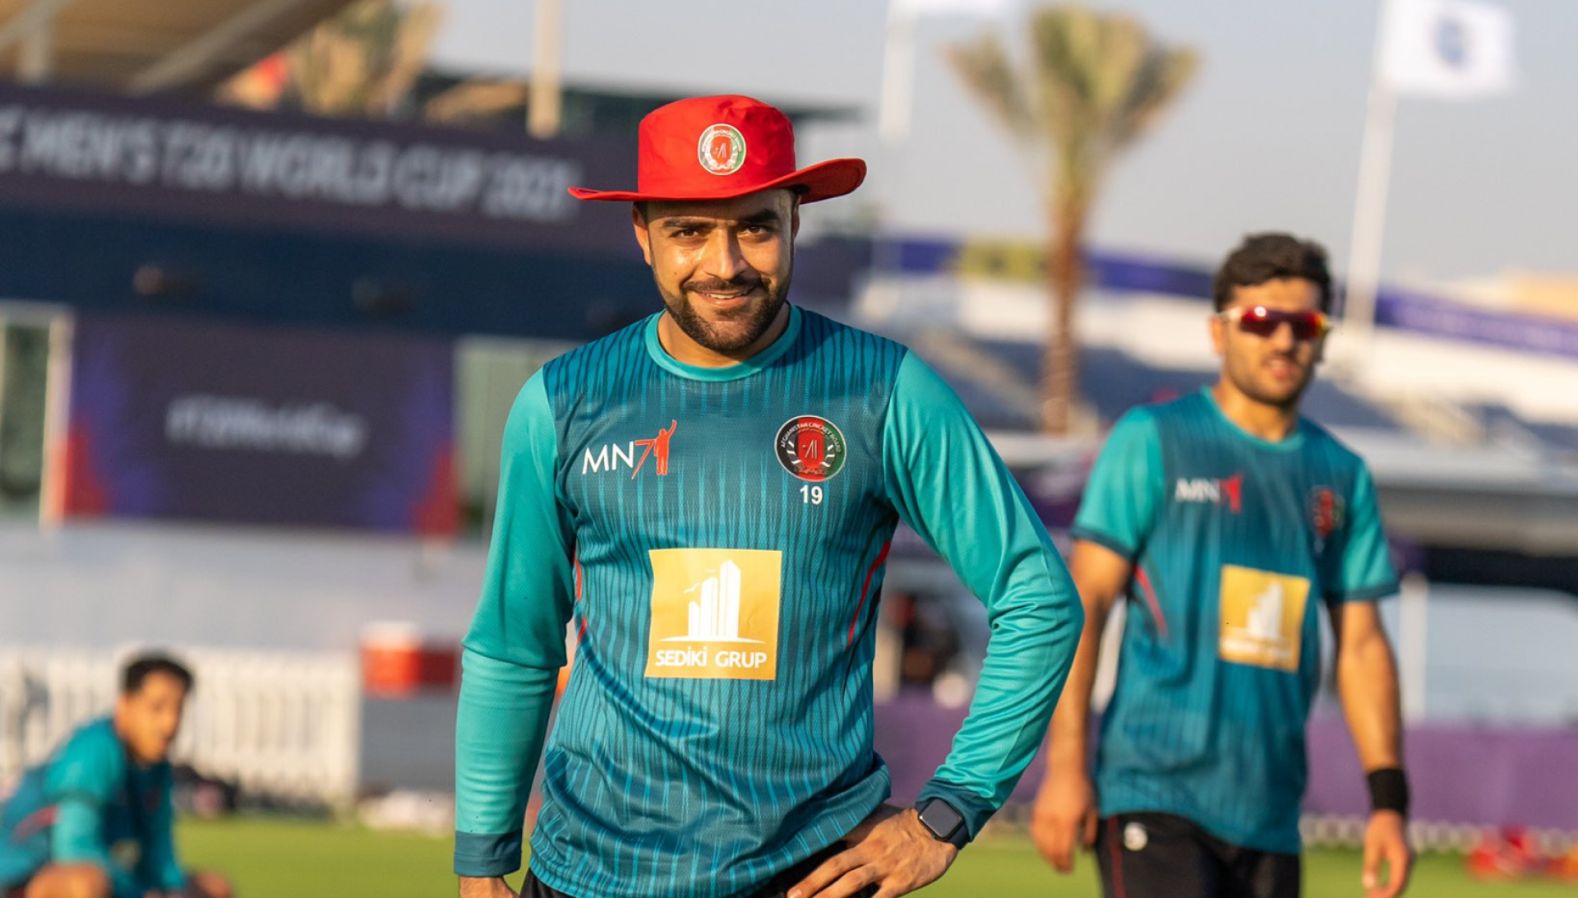 T20 World Cup | AFG vs SCO: Mohammad Nabi and co. need to yard out Scotland to begin their campaign